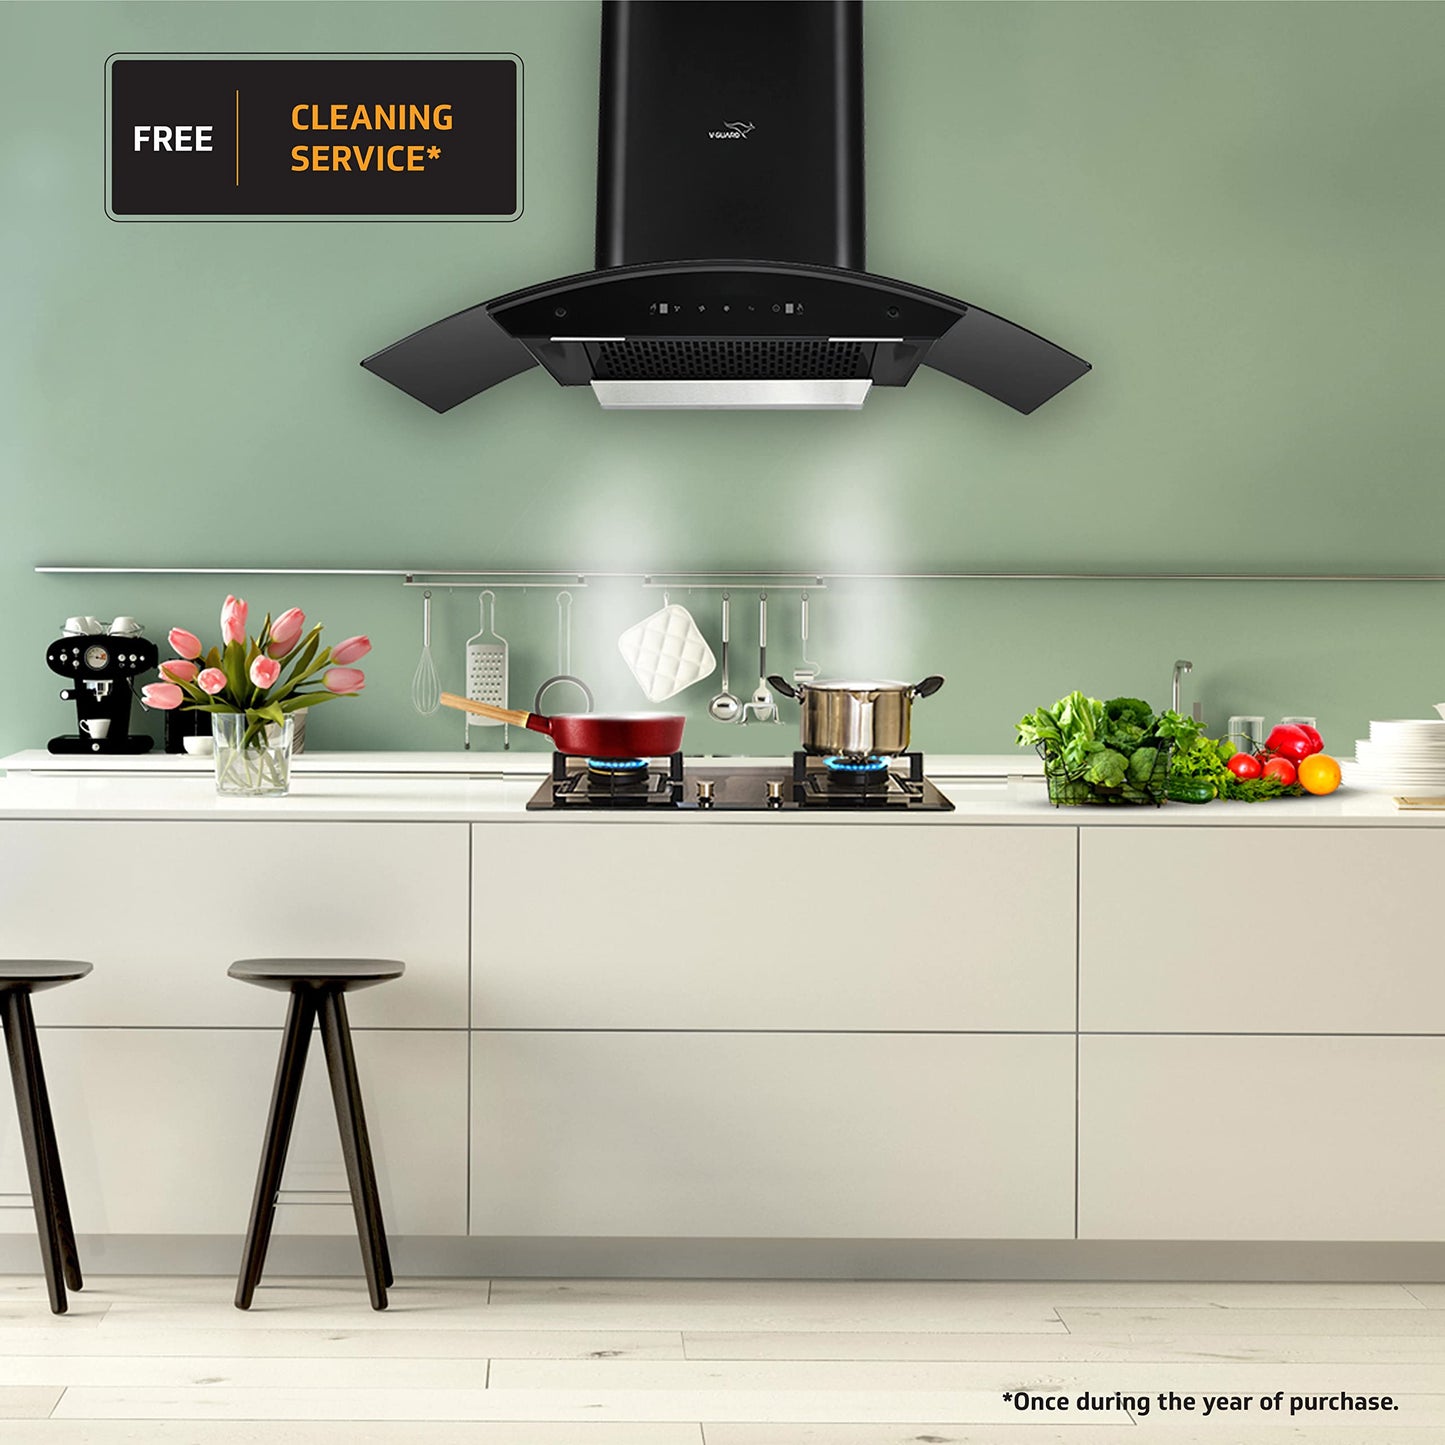 X20 BL180 Kitchen Chimney with 1350m³/hr Suction, Intelligent Auto Clean, Curved Glass, Baffle Filter, Motion Sensor Controls, Oil Collector Tray, LED Light (Black)